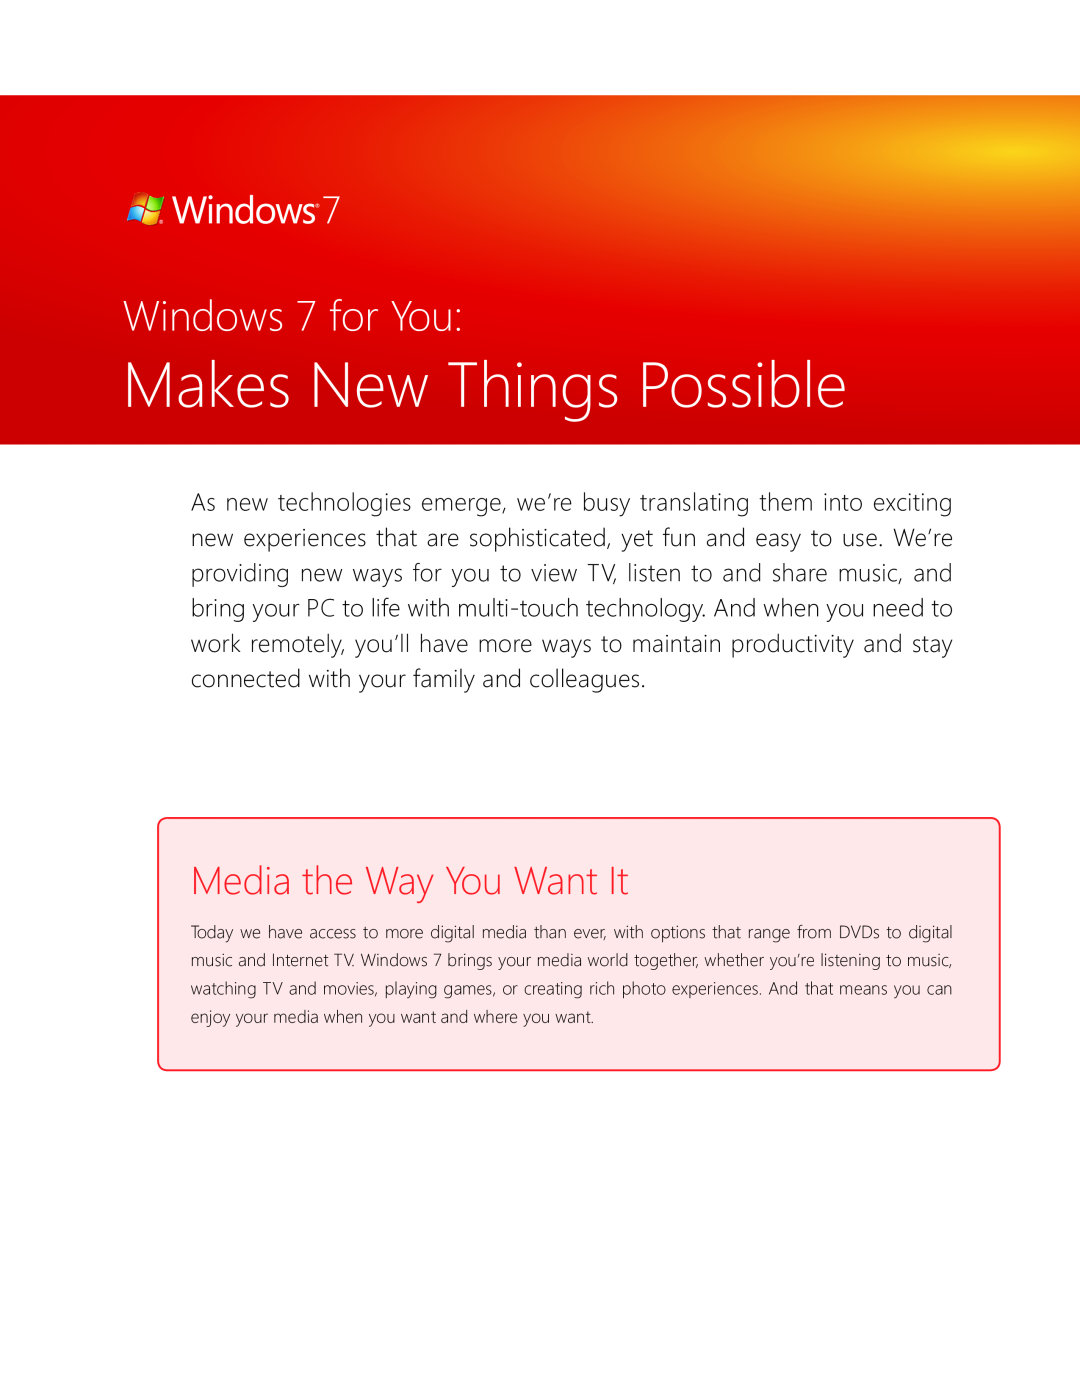 Microsoft QLF00195, GLC00182, GLC01878, GLC00184 Makes New Things Possible, Media the Way You Want It, Windows 7 for You 